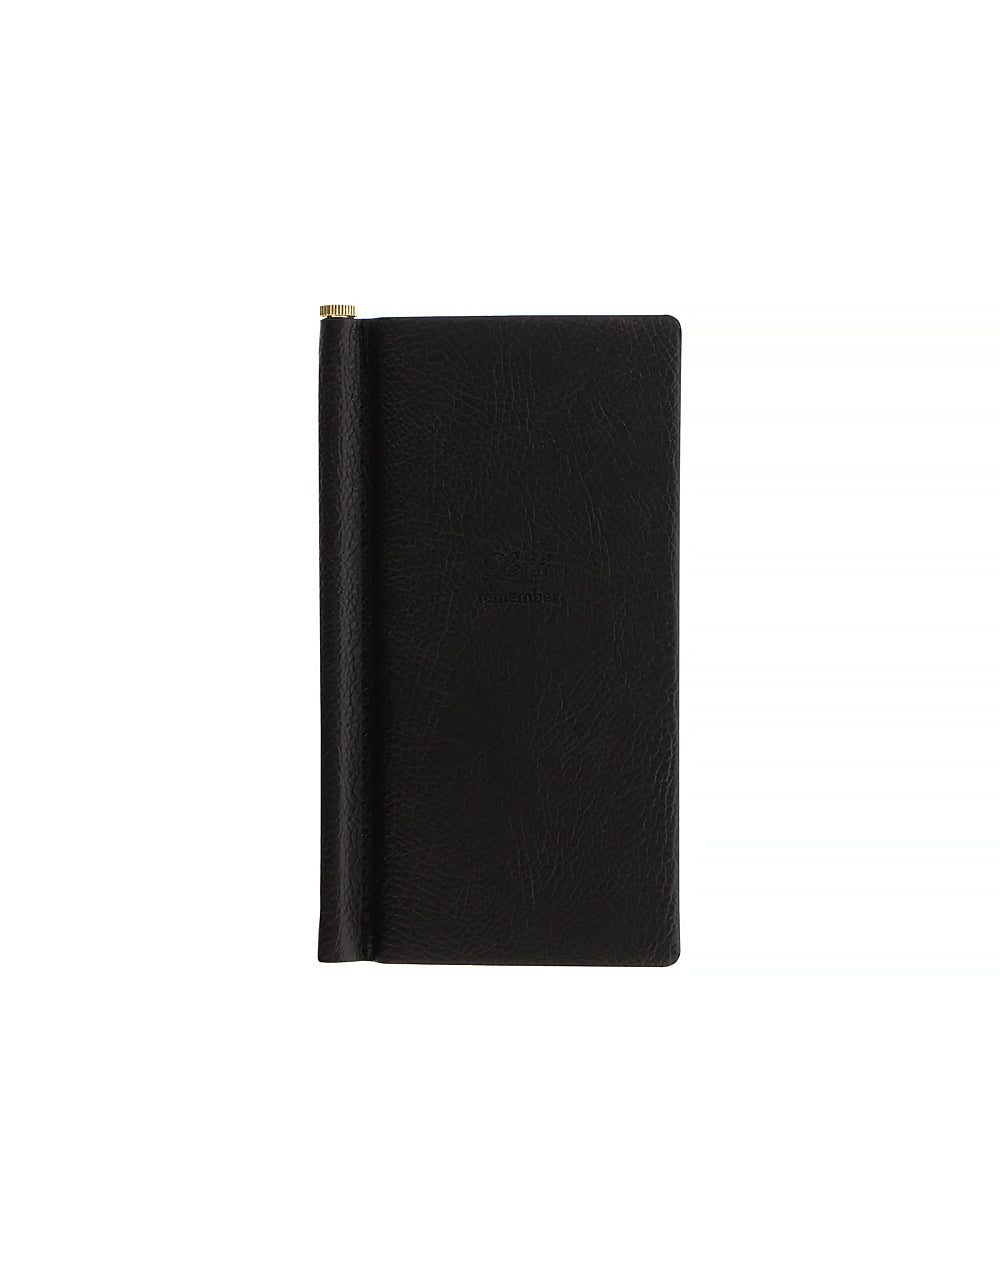 Pin on Pocket books / wallets /